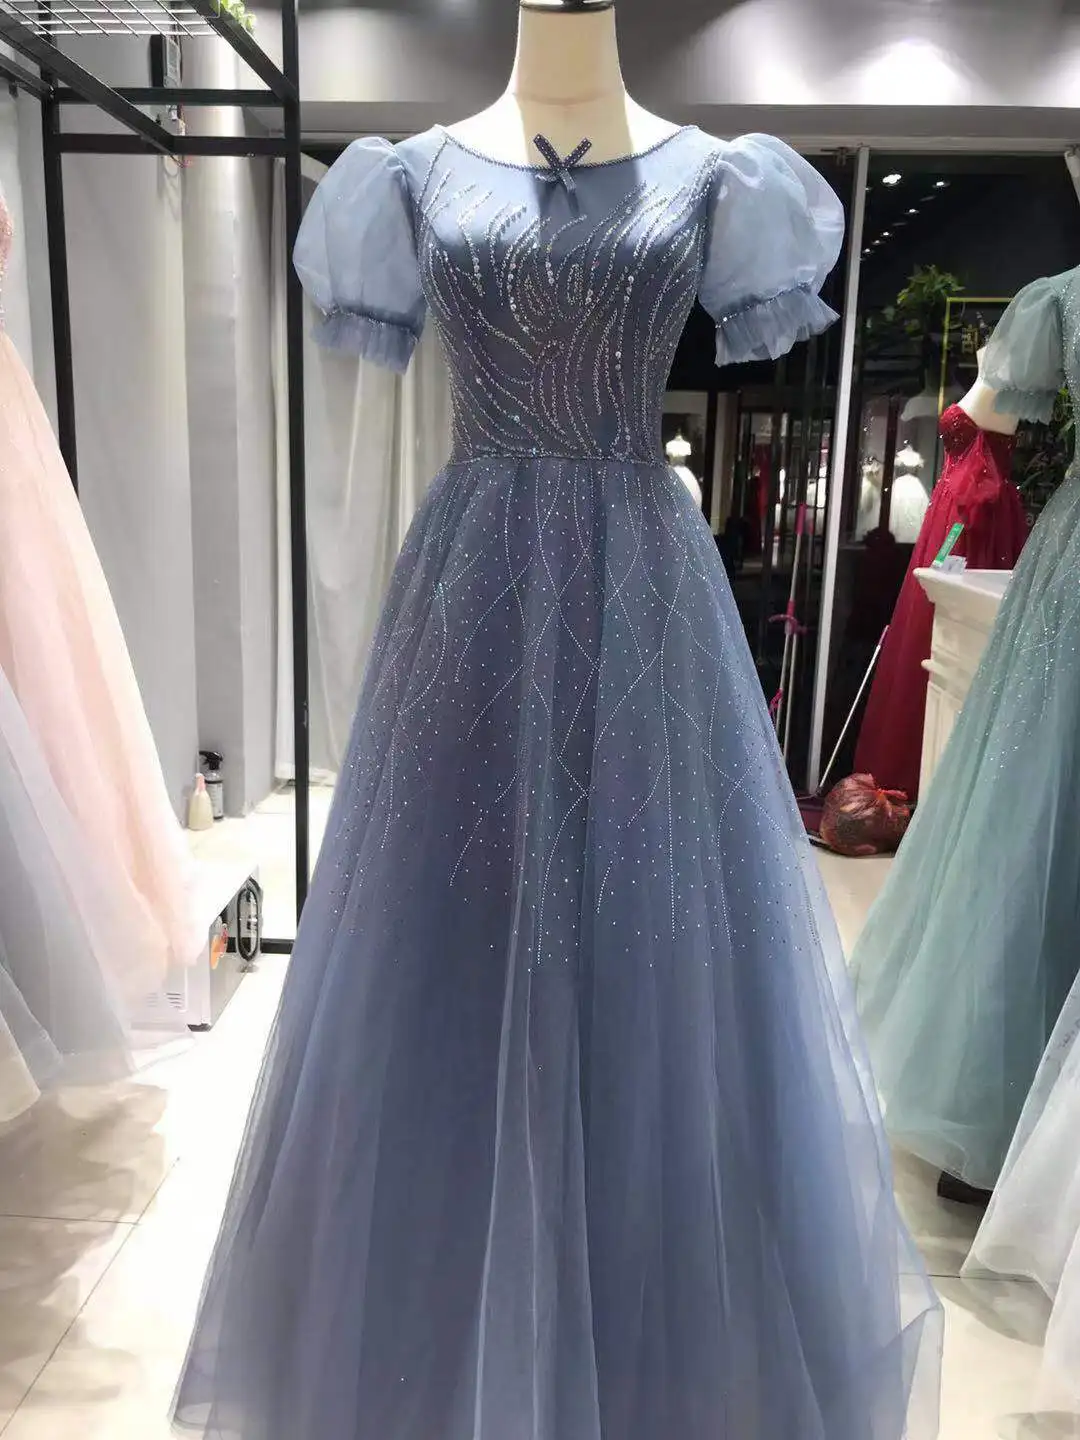 SSYFashion Luxury Sequins Beading Evening Dress Puff Sleeve A-line Scoop Long Formal Party Gowns for Women 6 Colors Custom Size evening dresses for weddings Evening Dresses